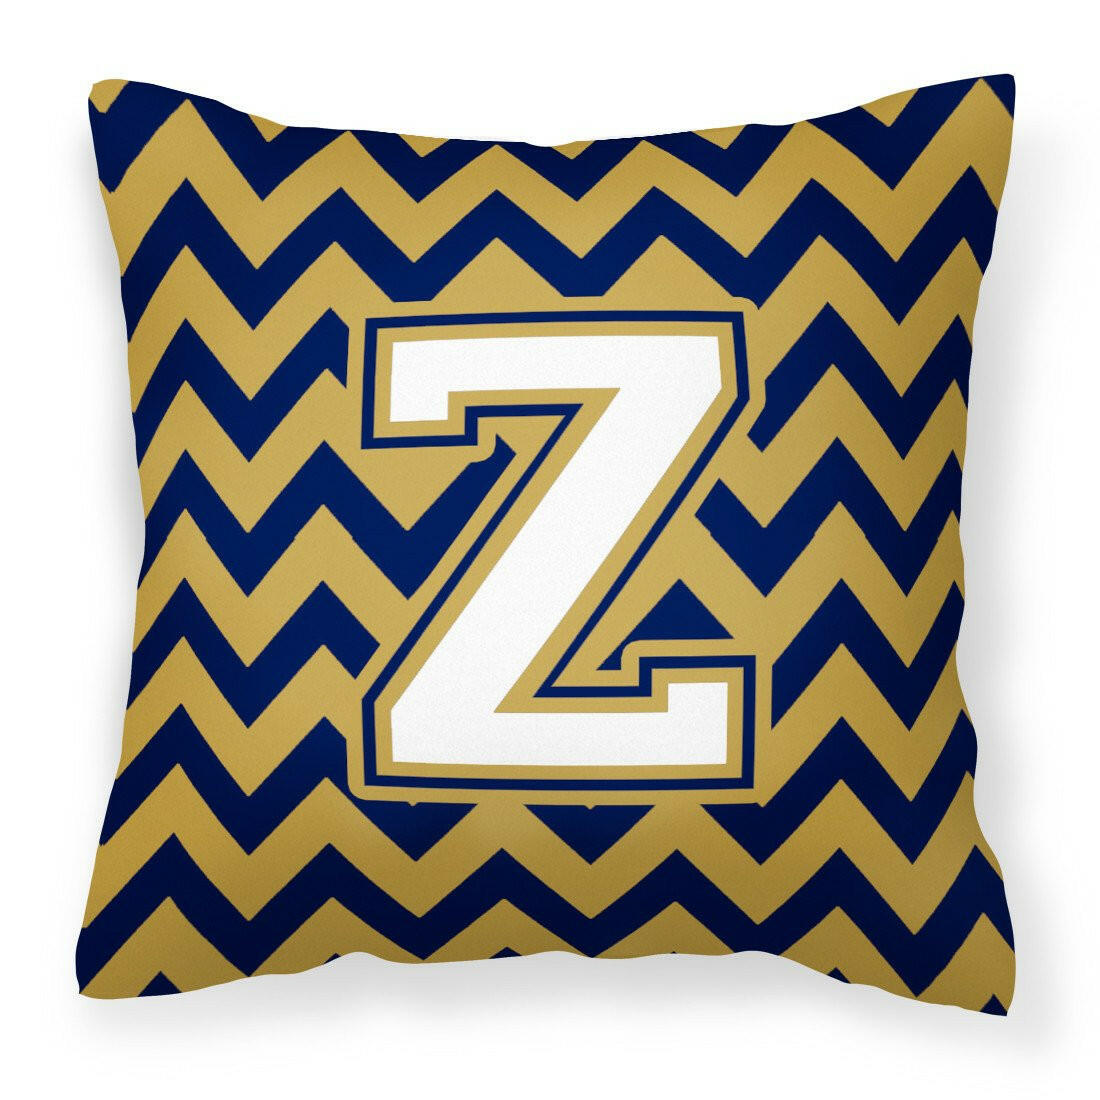 Letter Z Chevron Navy Blue and Gold Fabric Decorative Pillow CJ1057-ZPW1414 by Caroline's Treasures